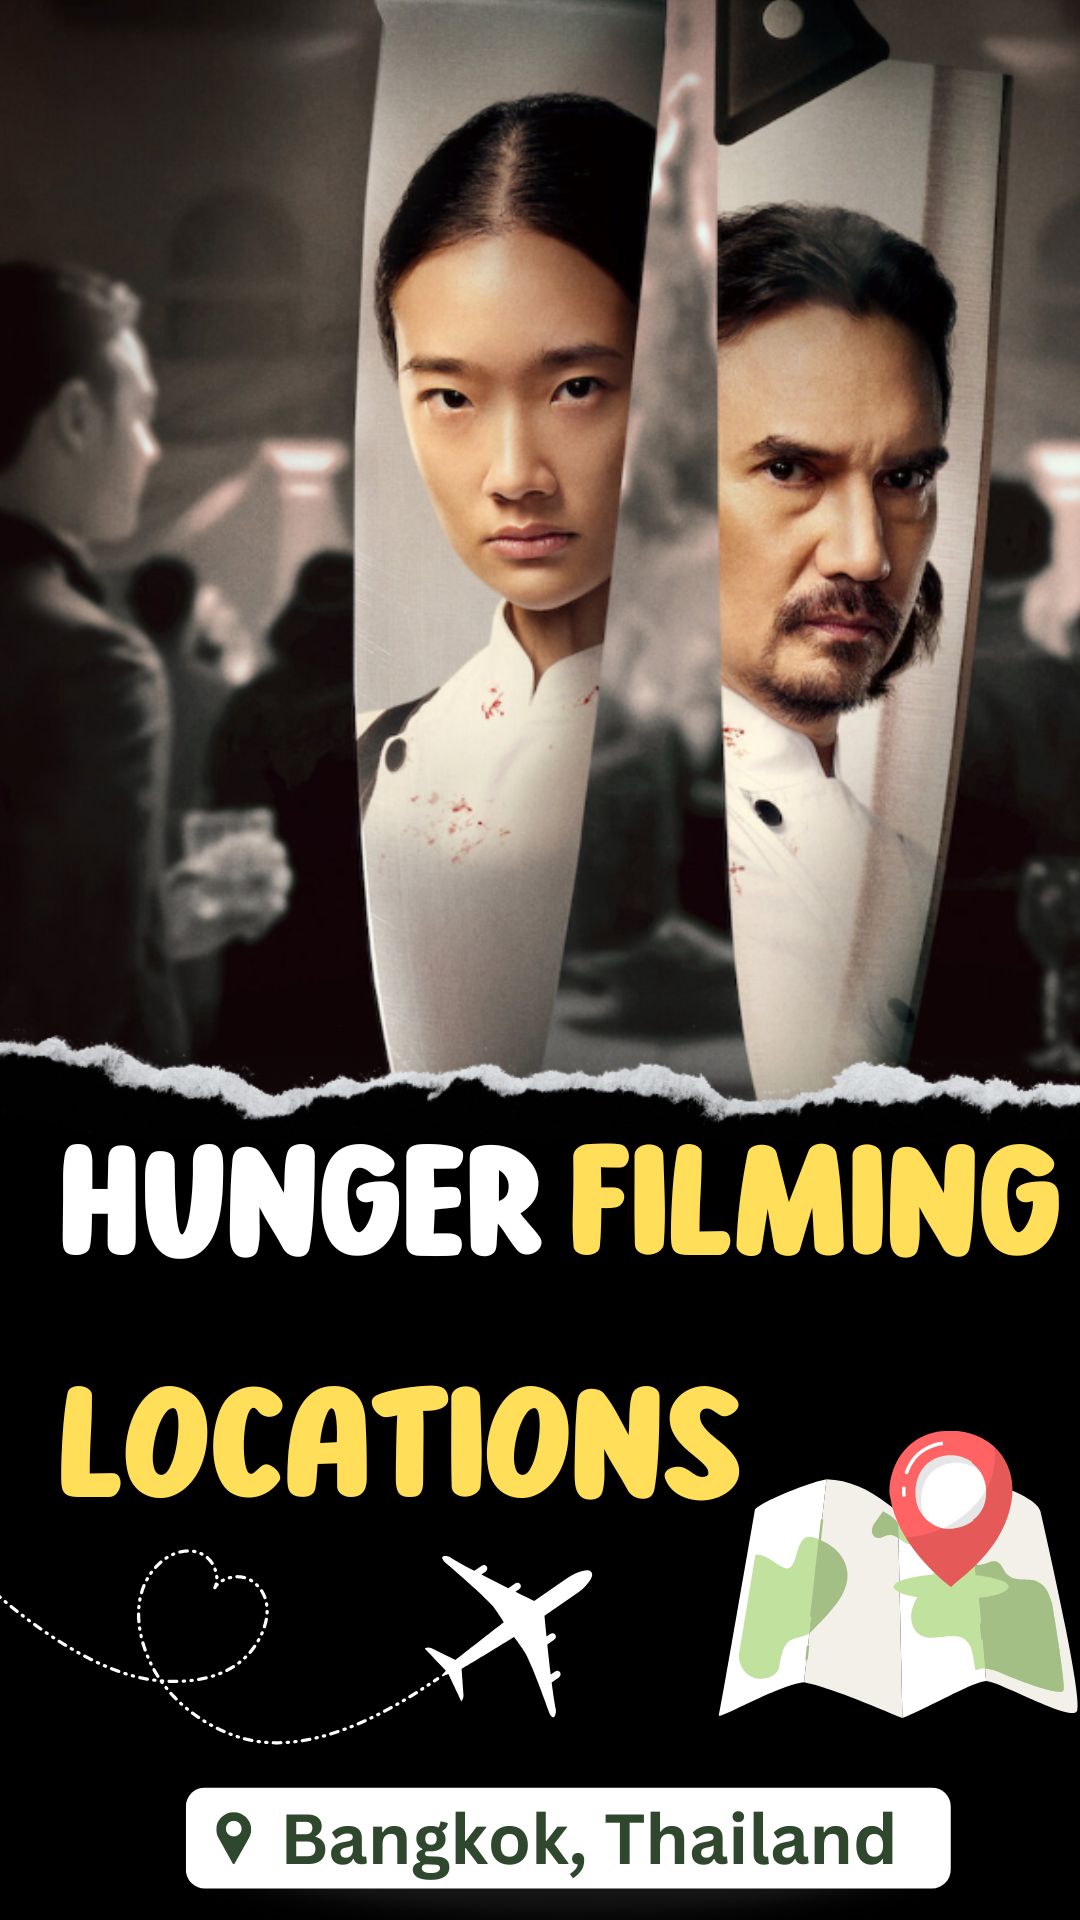 Hunger Filming Locations